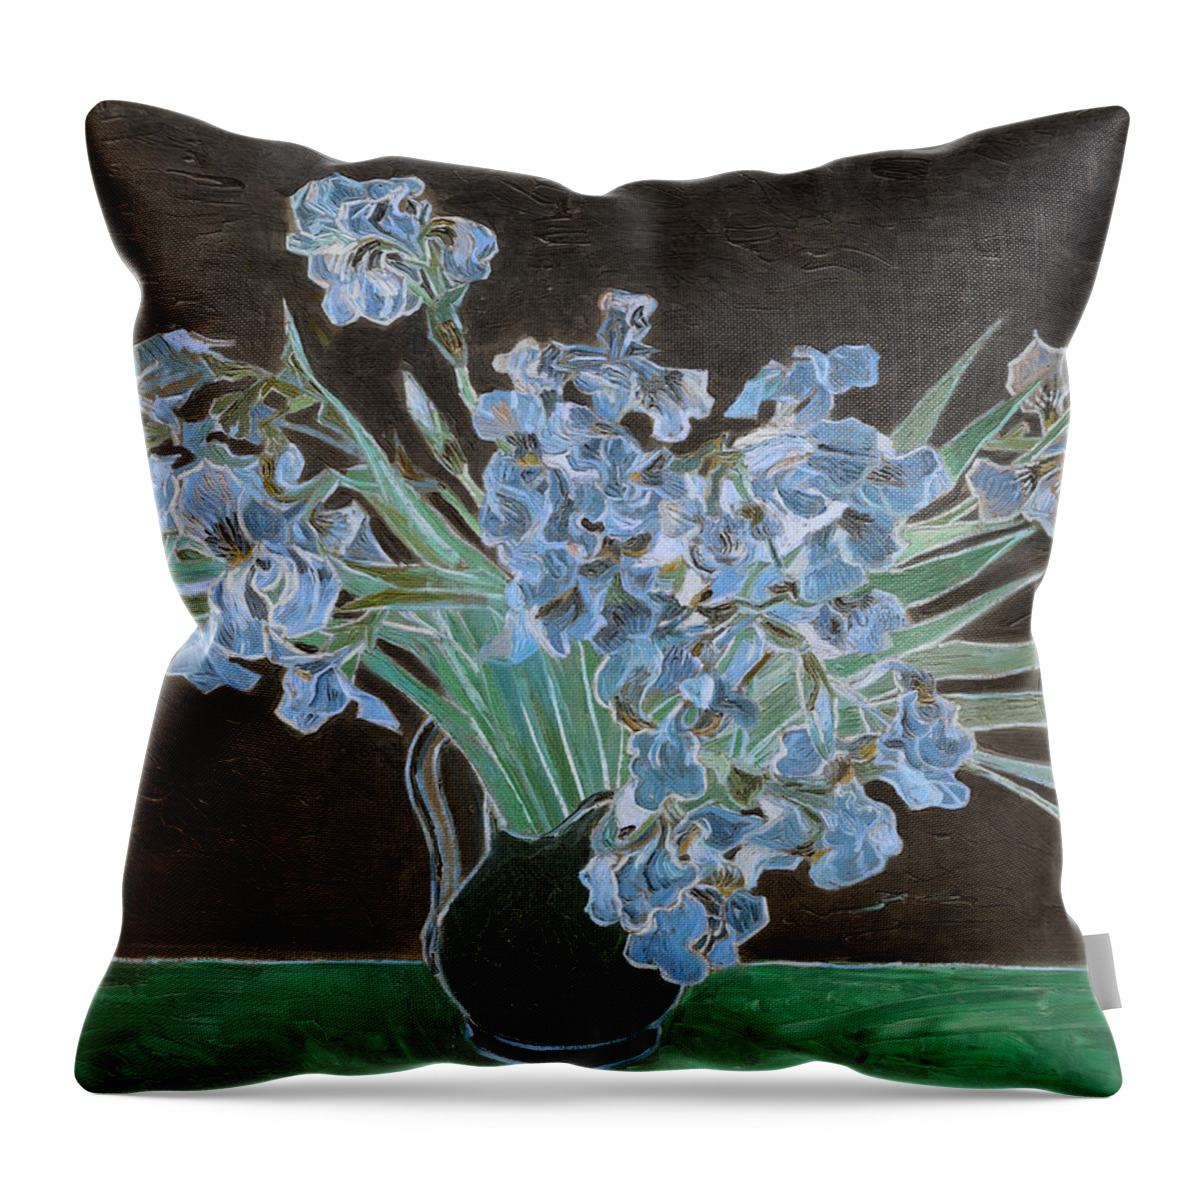 Abstract In The Living Room Throw Pillow featuring the digital art Inv Blend 11 van Gogh by David Bridburg